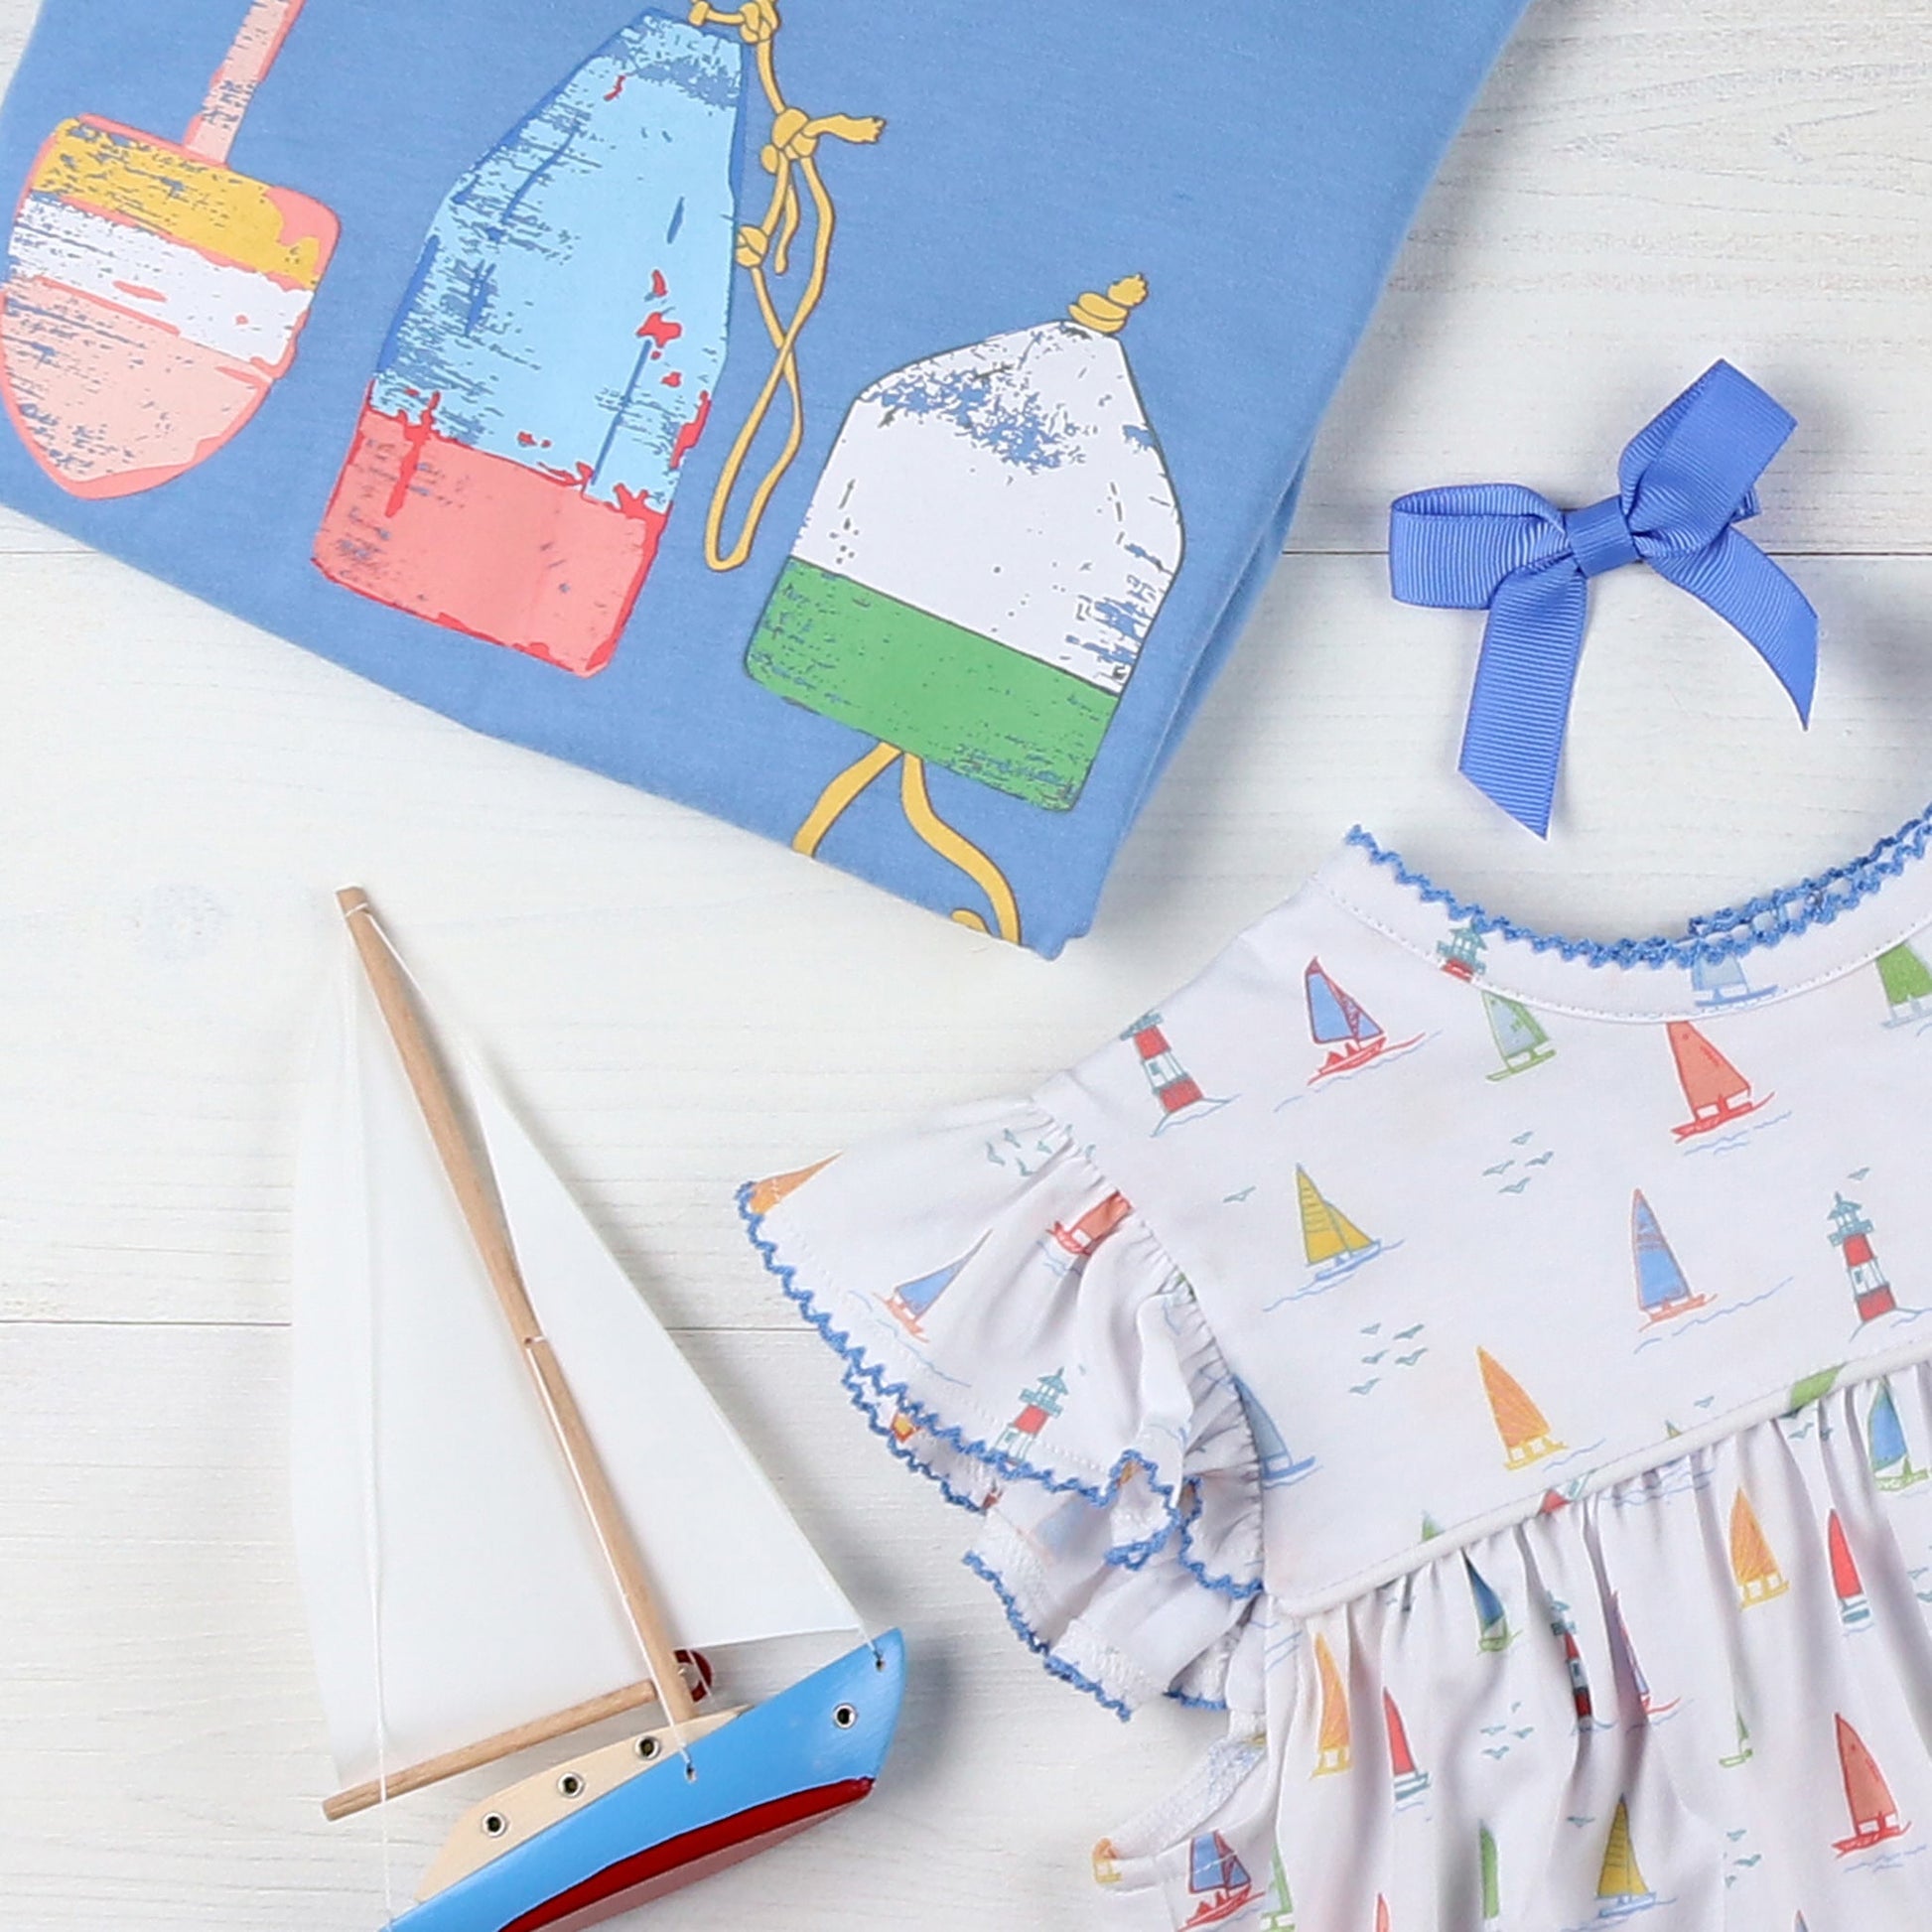 flatlay of childrens summer clothing